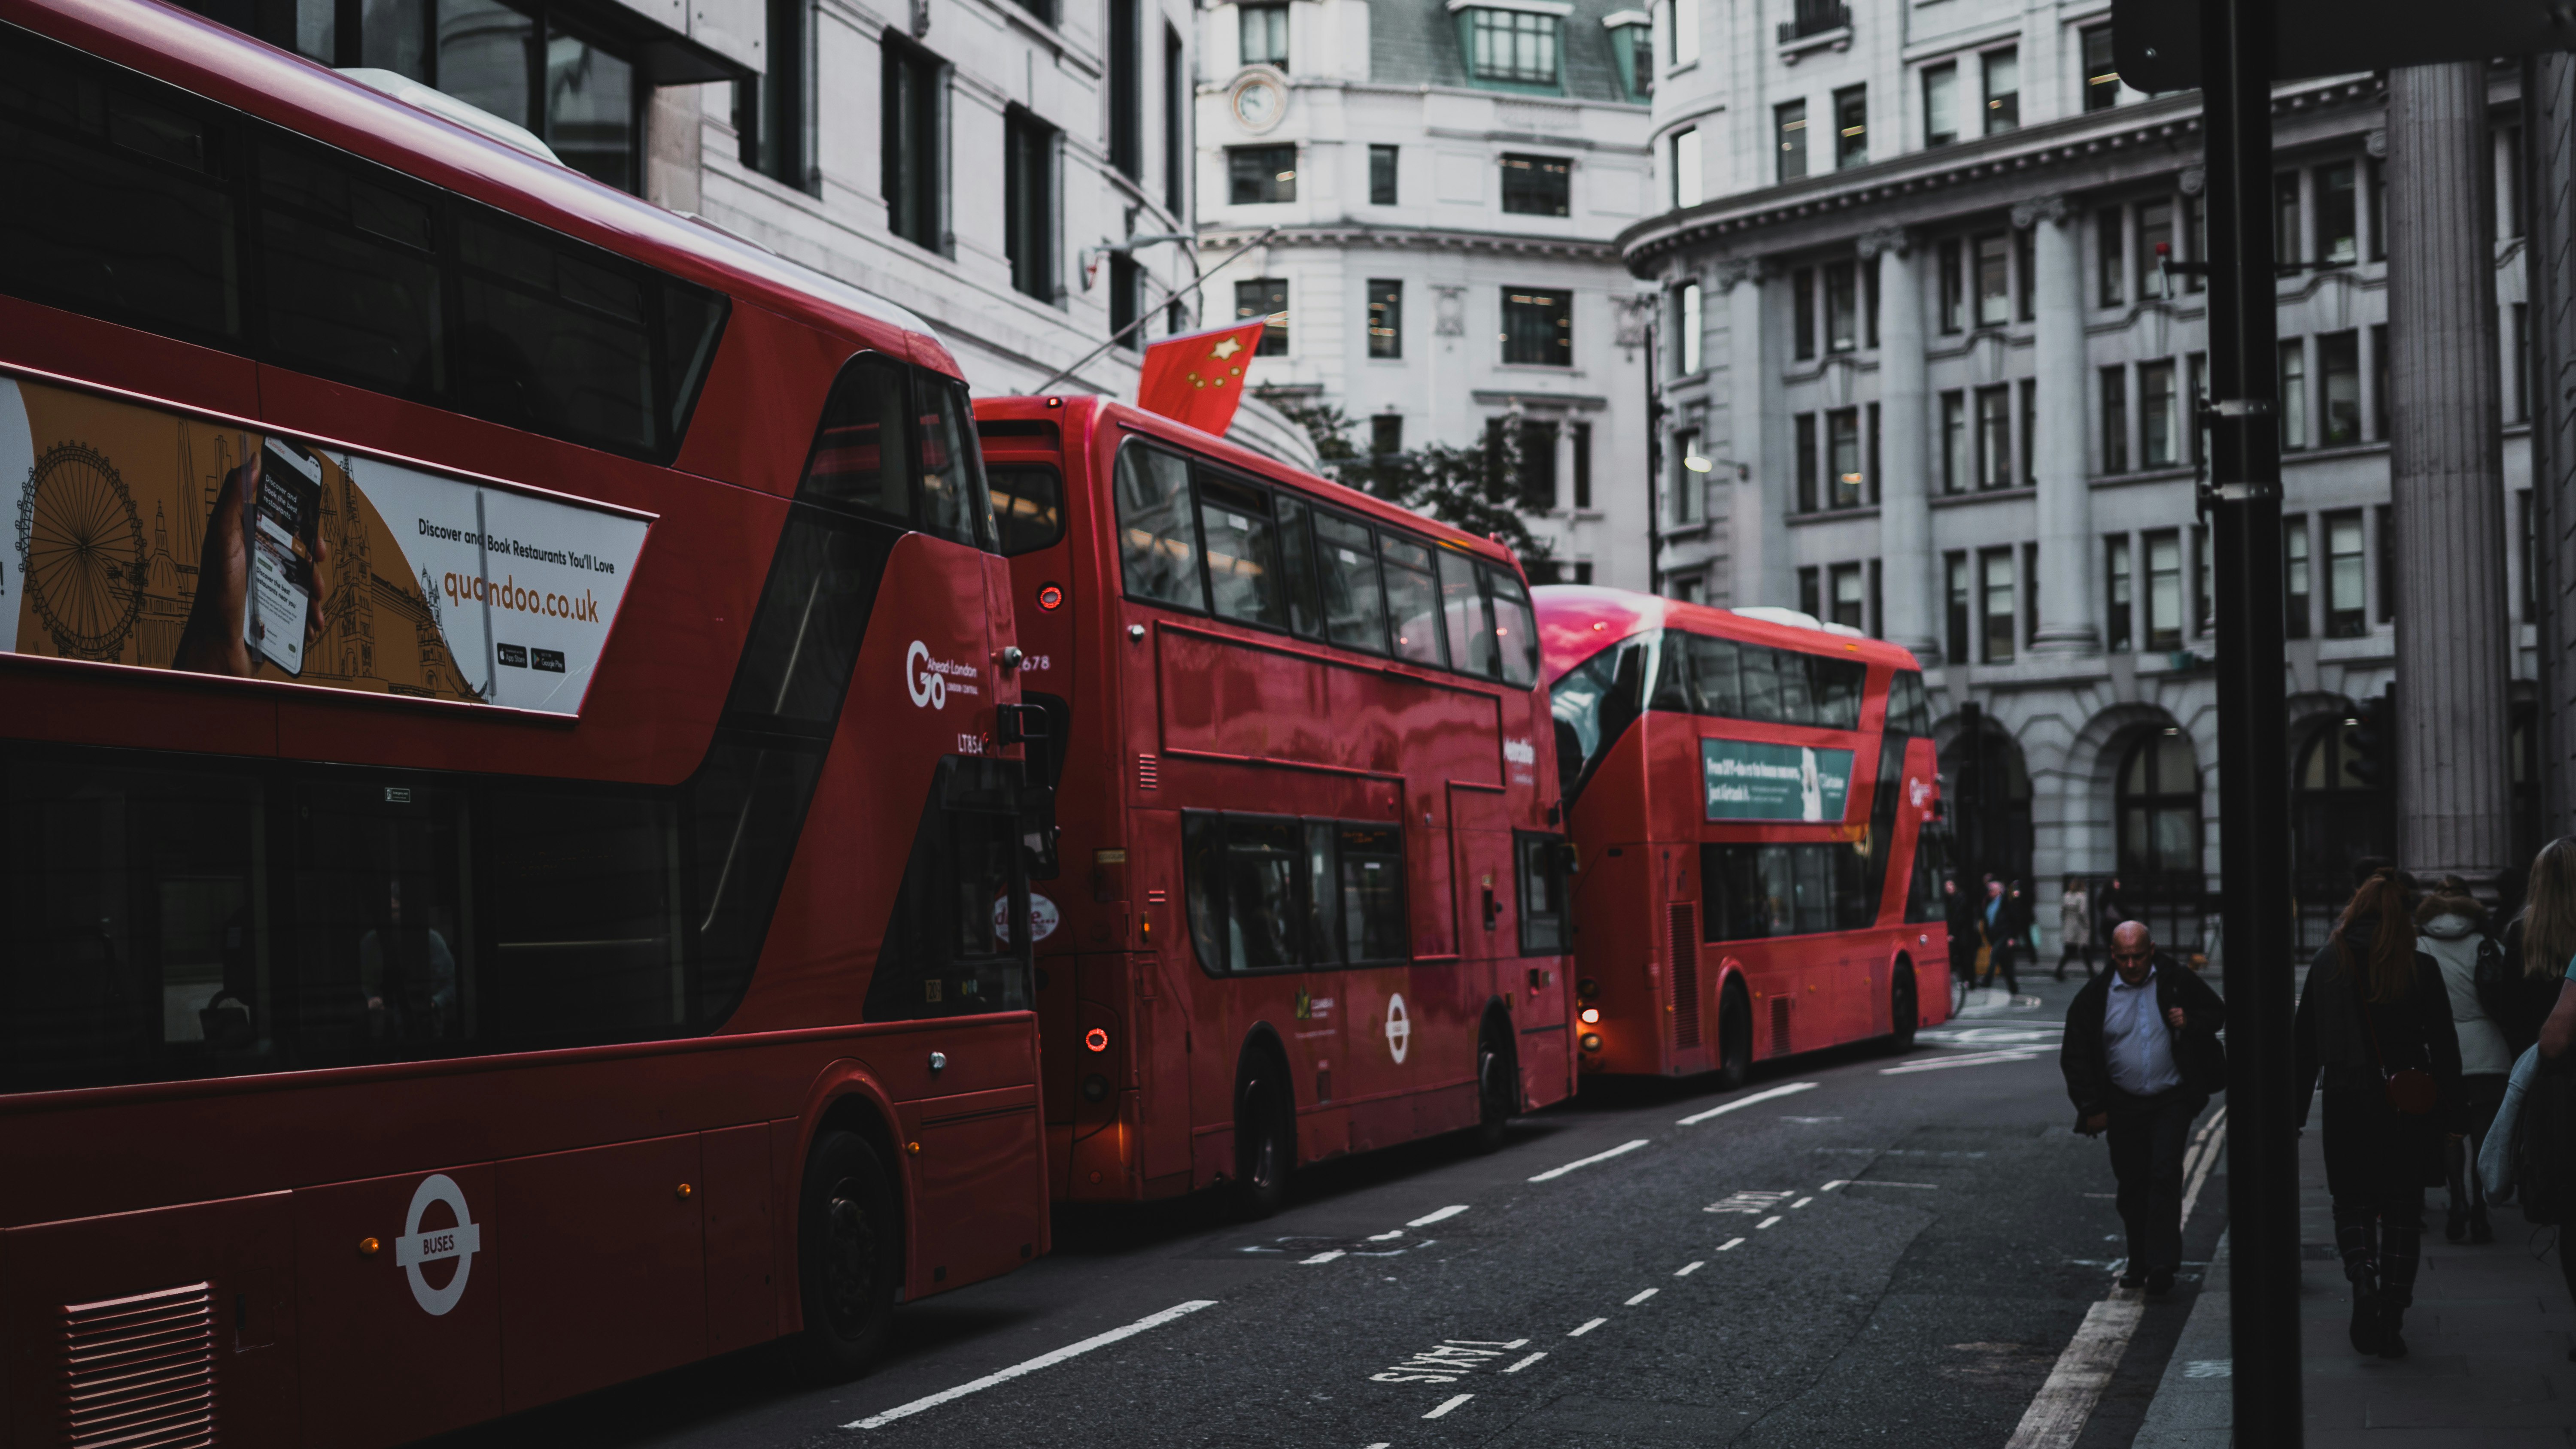 Whats London without the red Bus ?